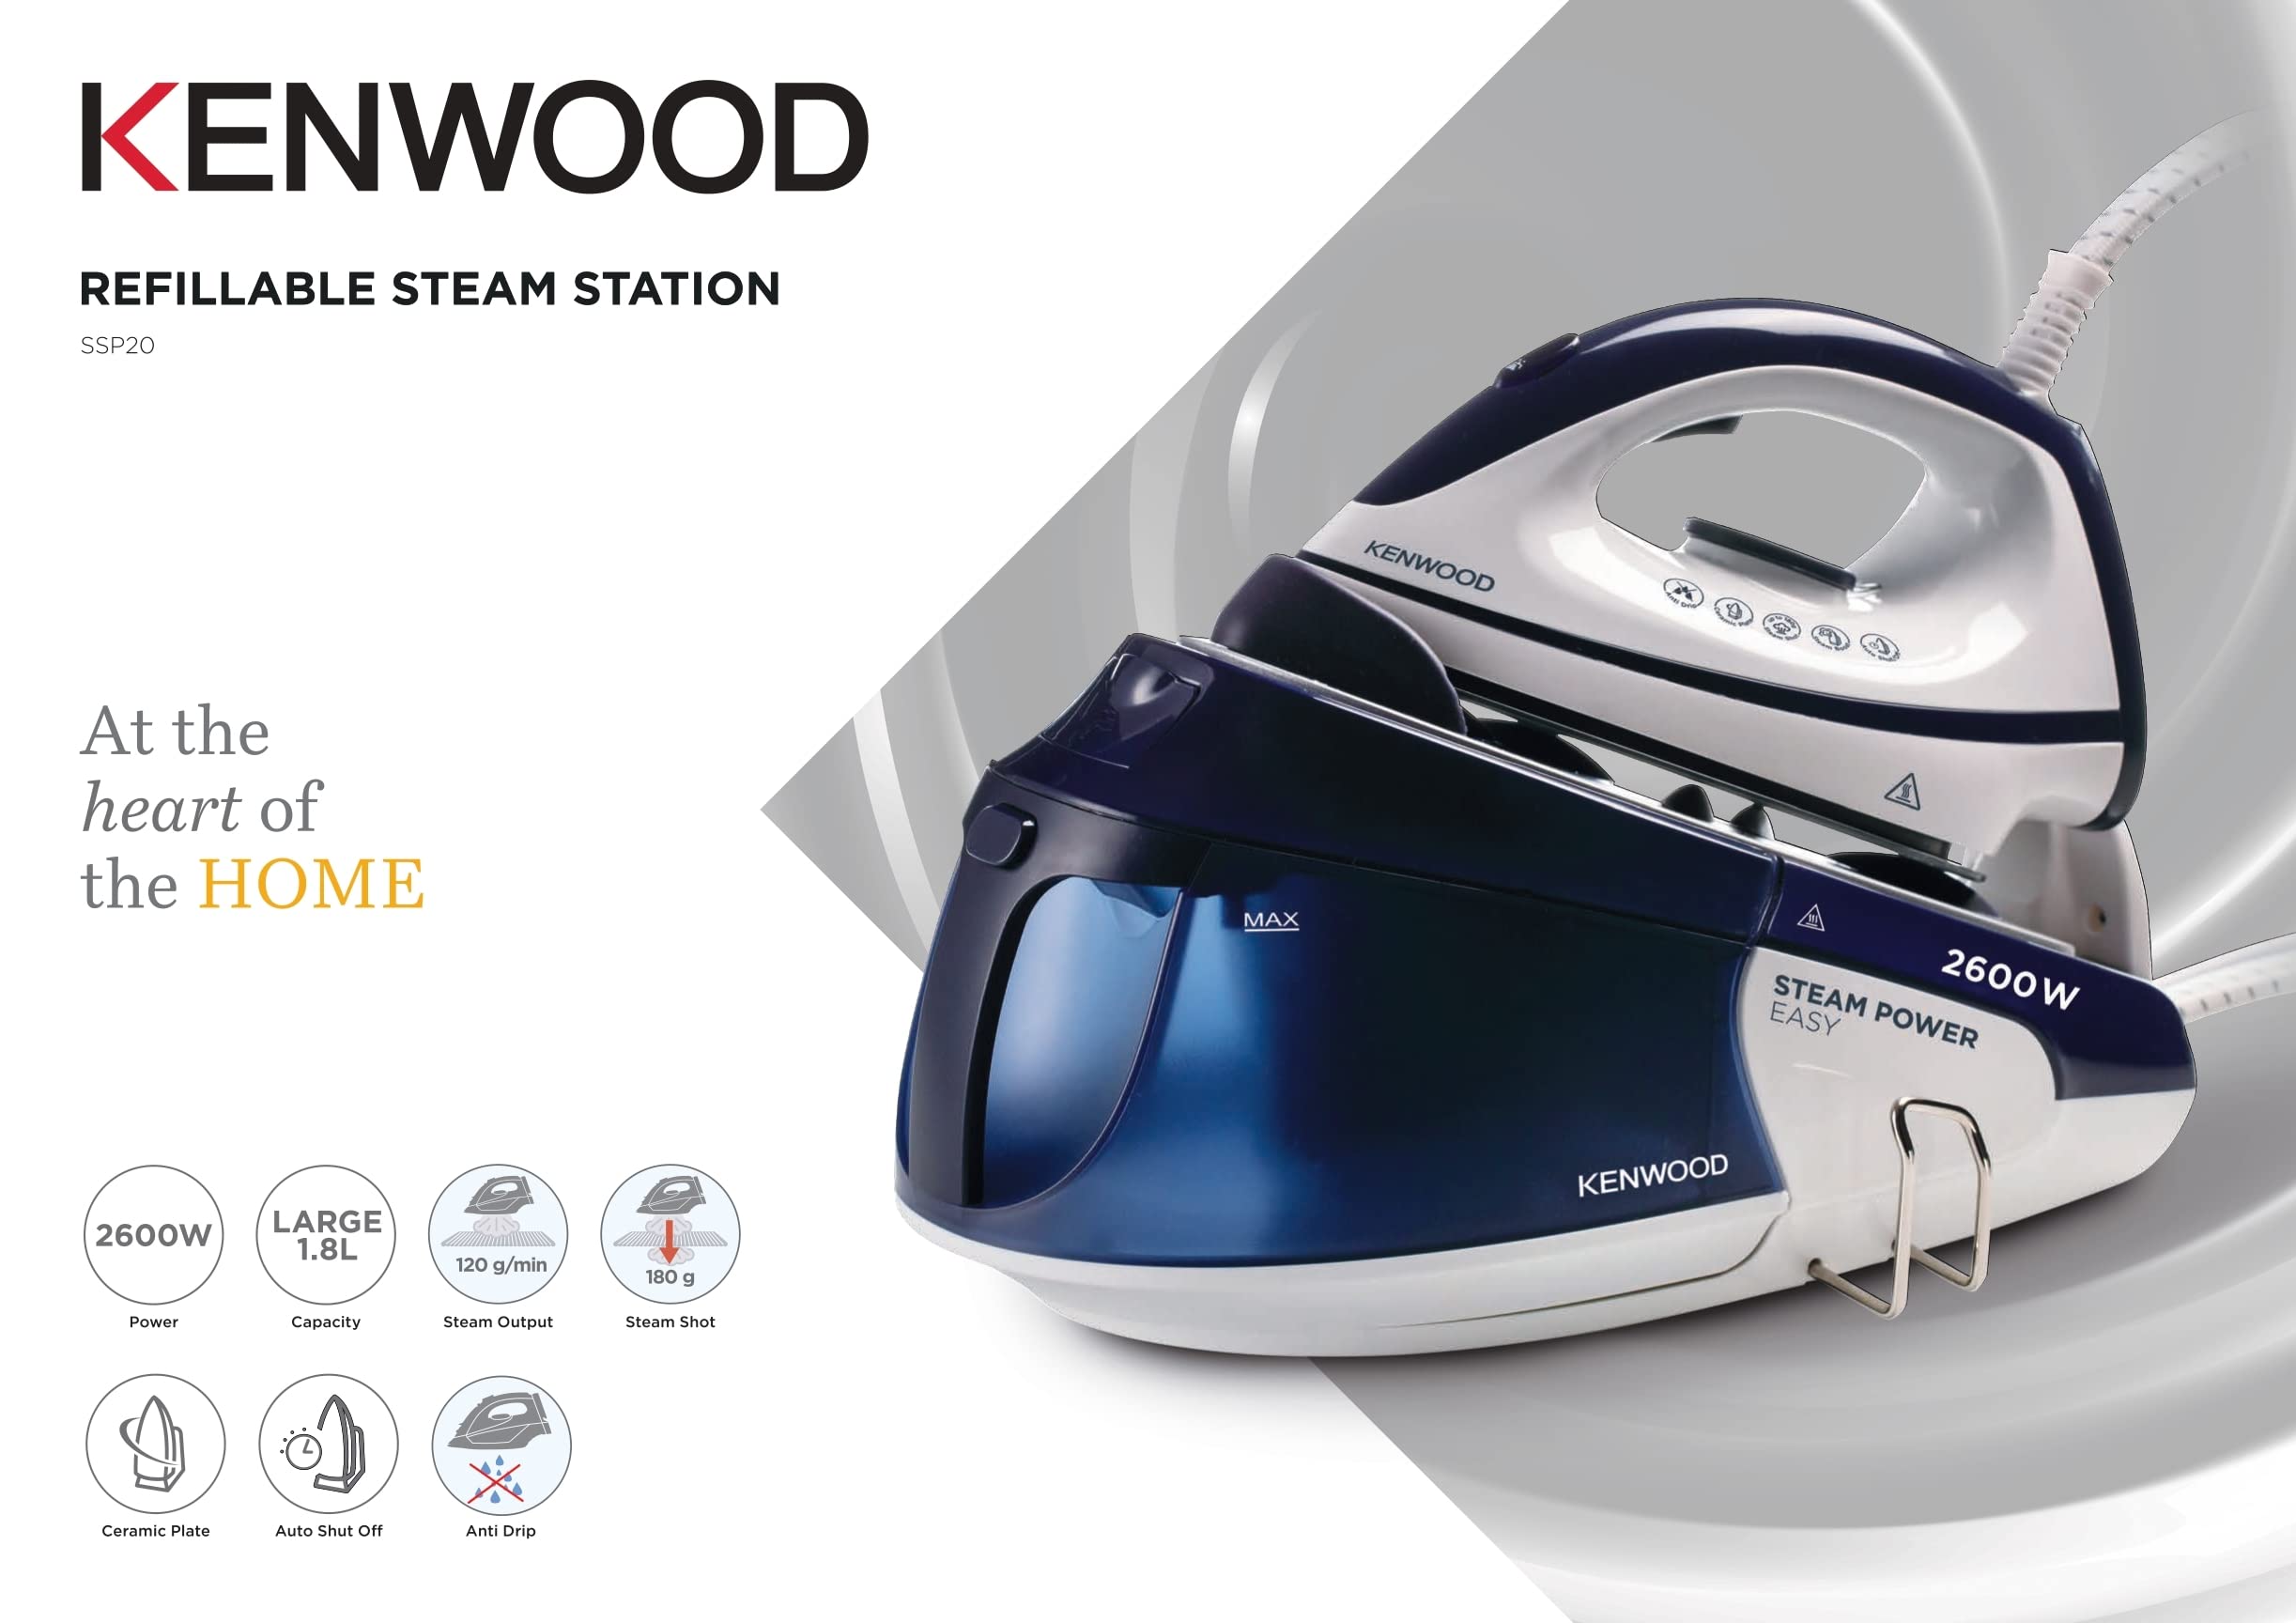 KENWOOD Steam Iron Steam Station 2600W with 1.8L Water Tank Capacity, Ceramic Soleplate, 180g Steam Shot, Anti Drip, Auto Shut Off, Self Clean Function SSP20.000WB White/Blue